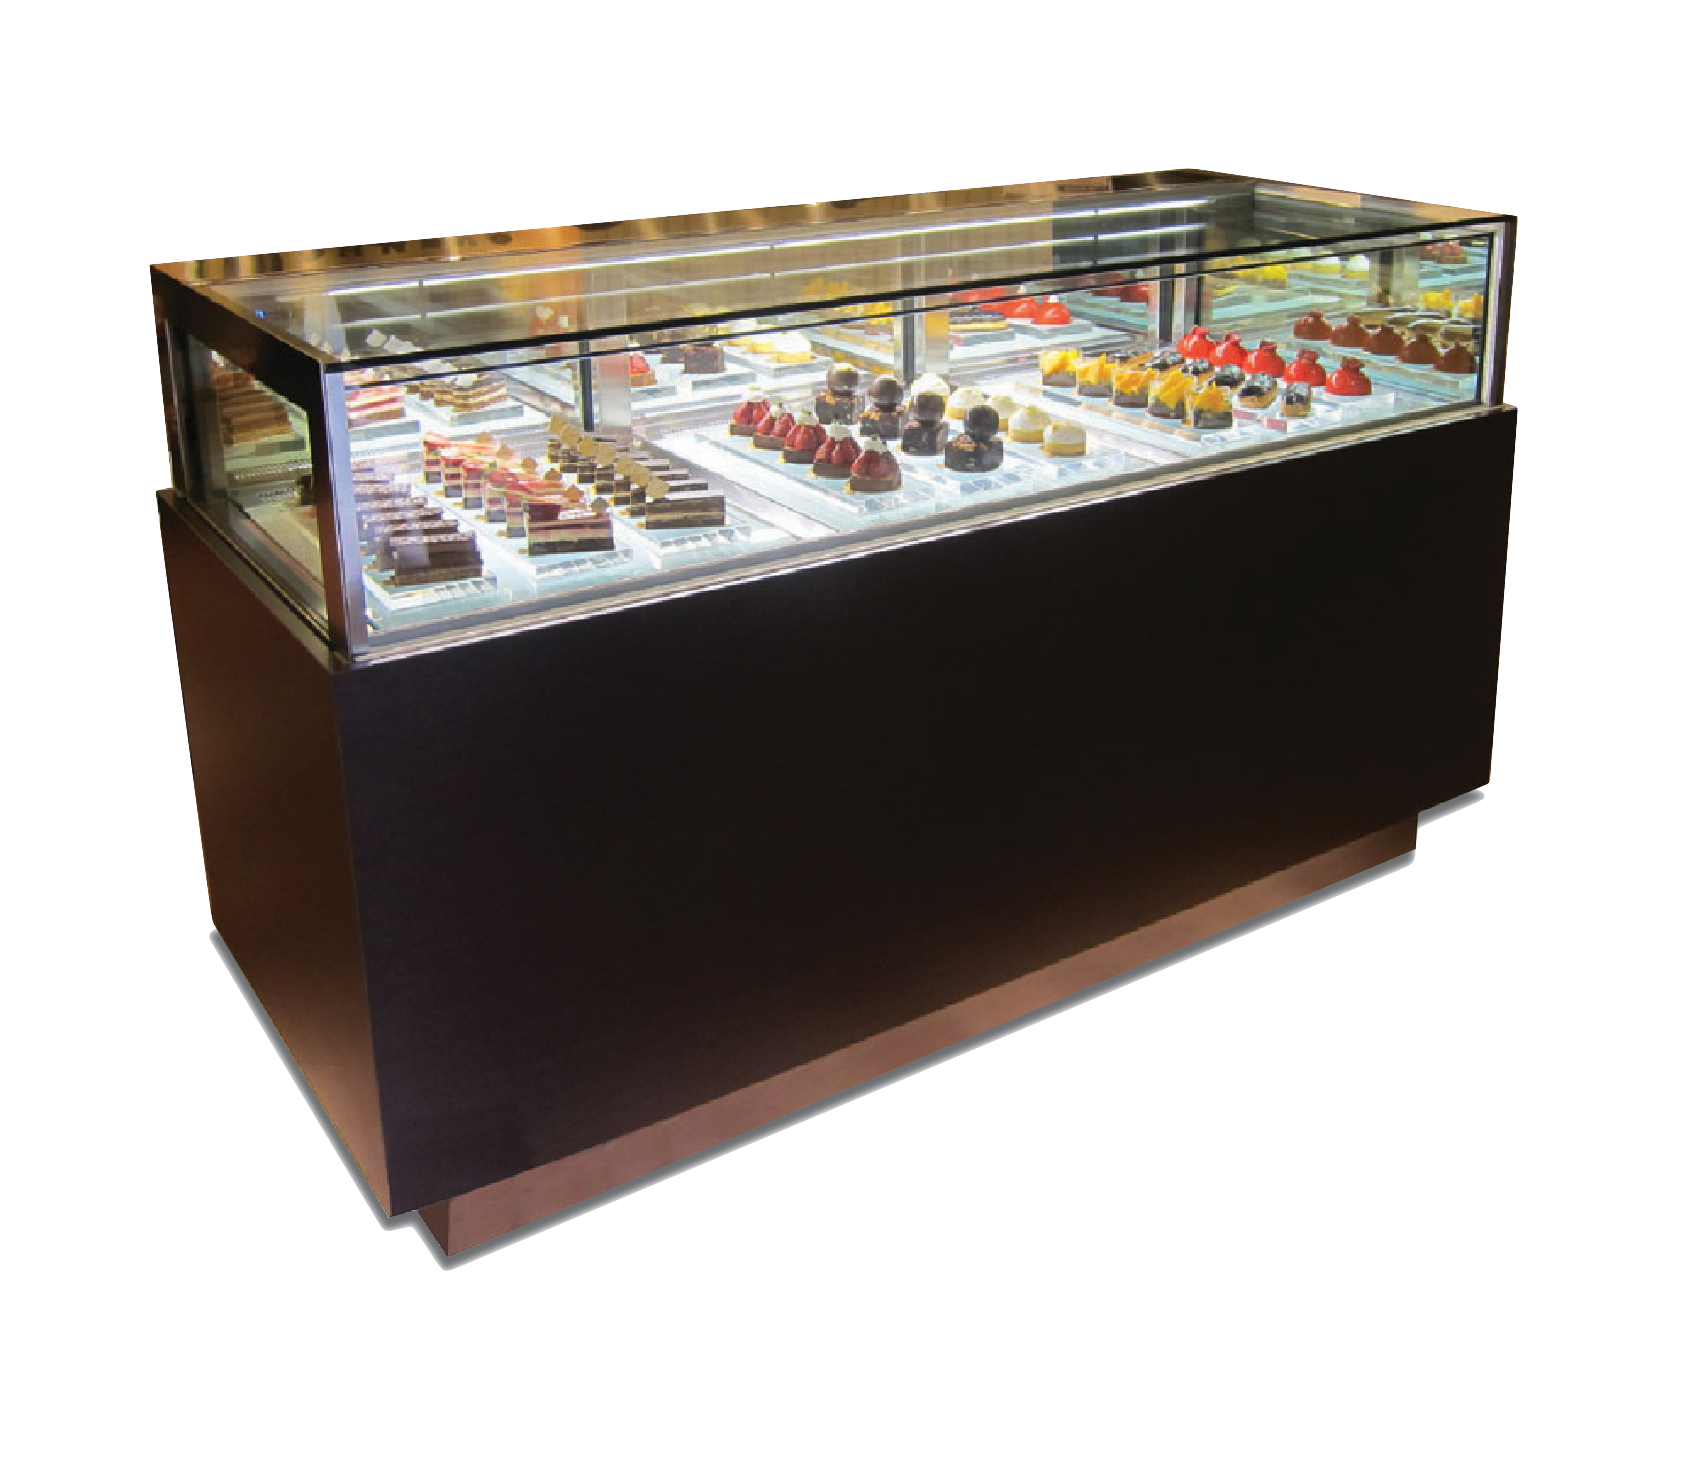 Cake Display Cabinet Series  Cabinet Cake Front View Png  800x800 PNG  Download  PNGkit